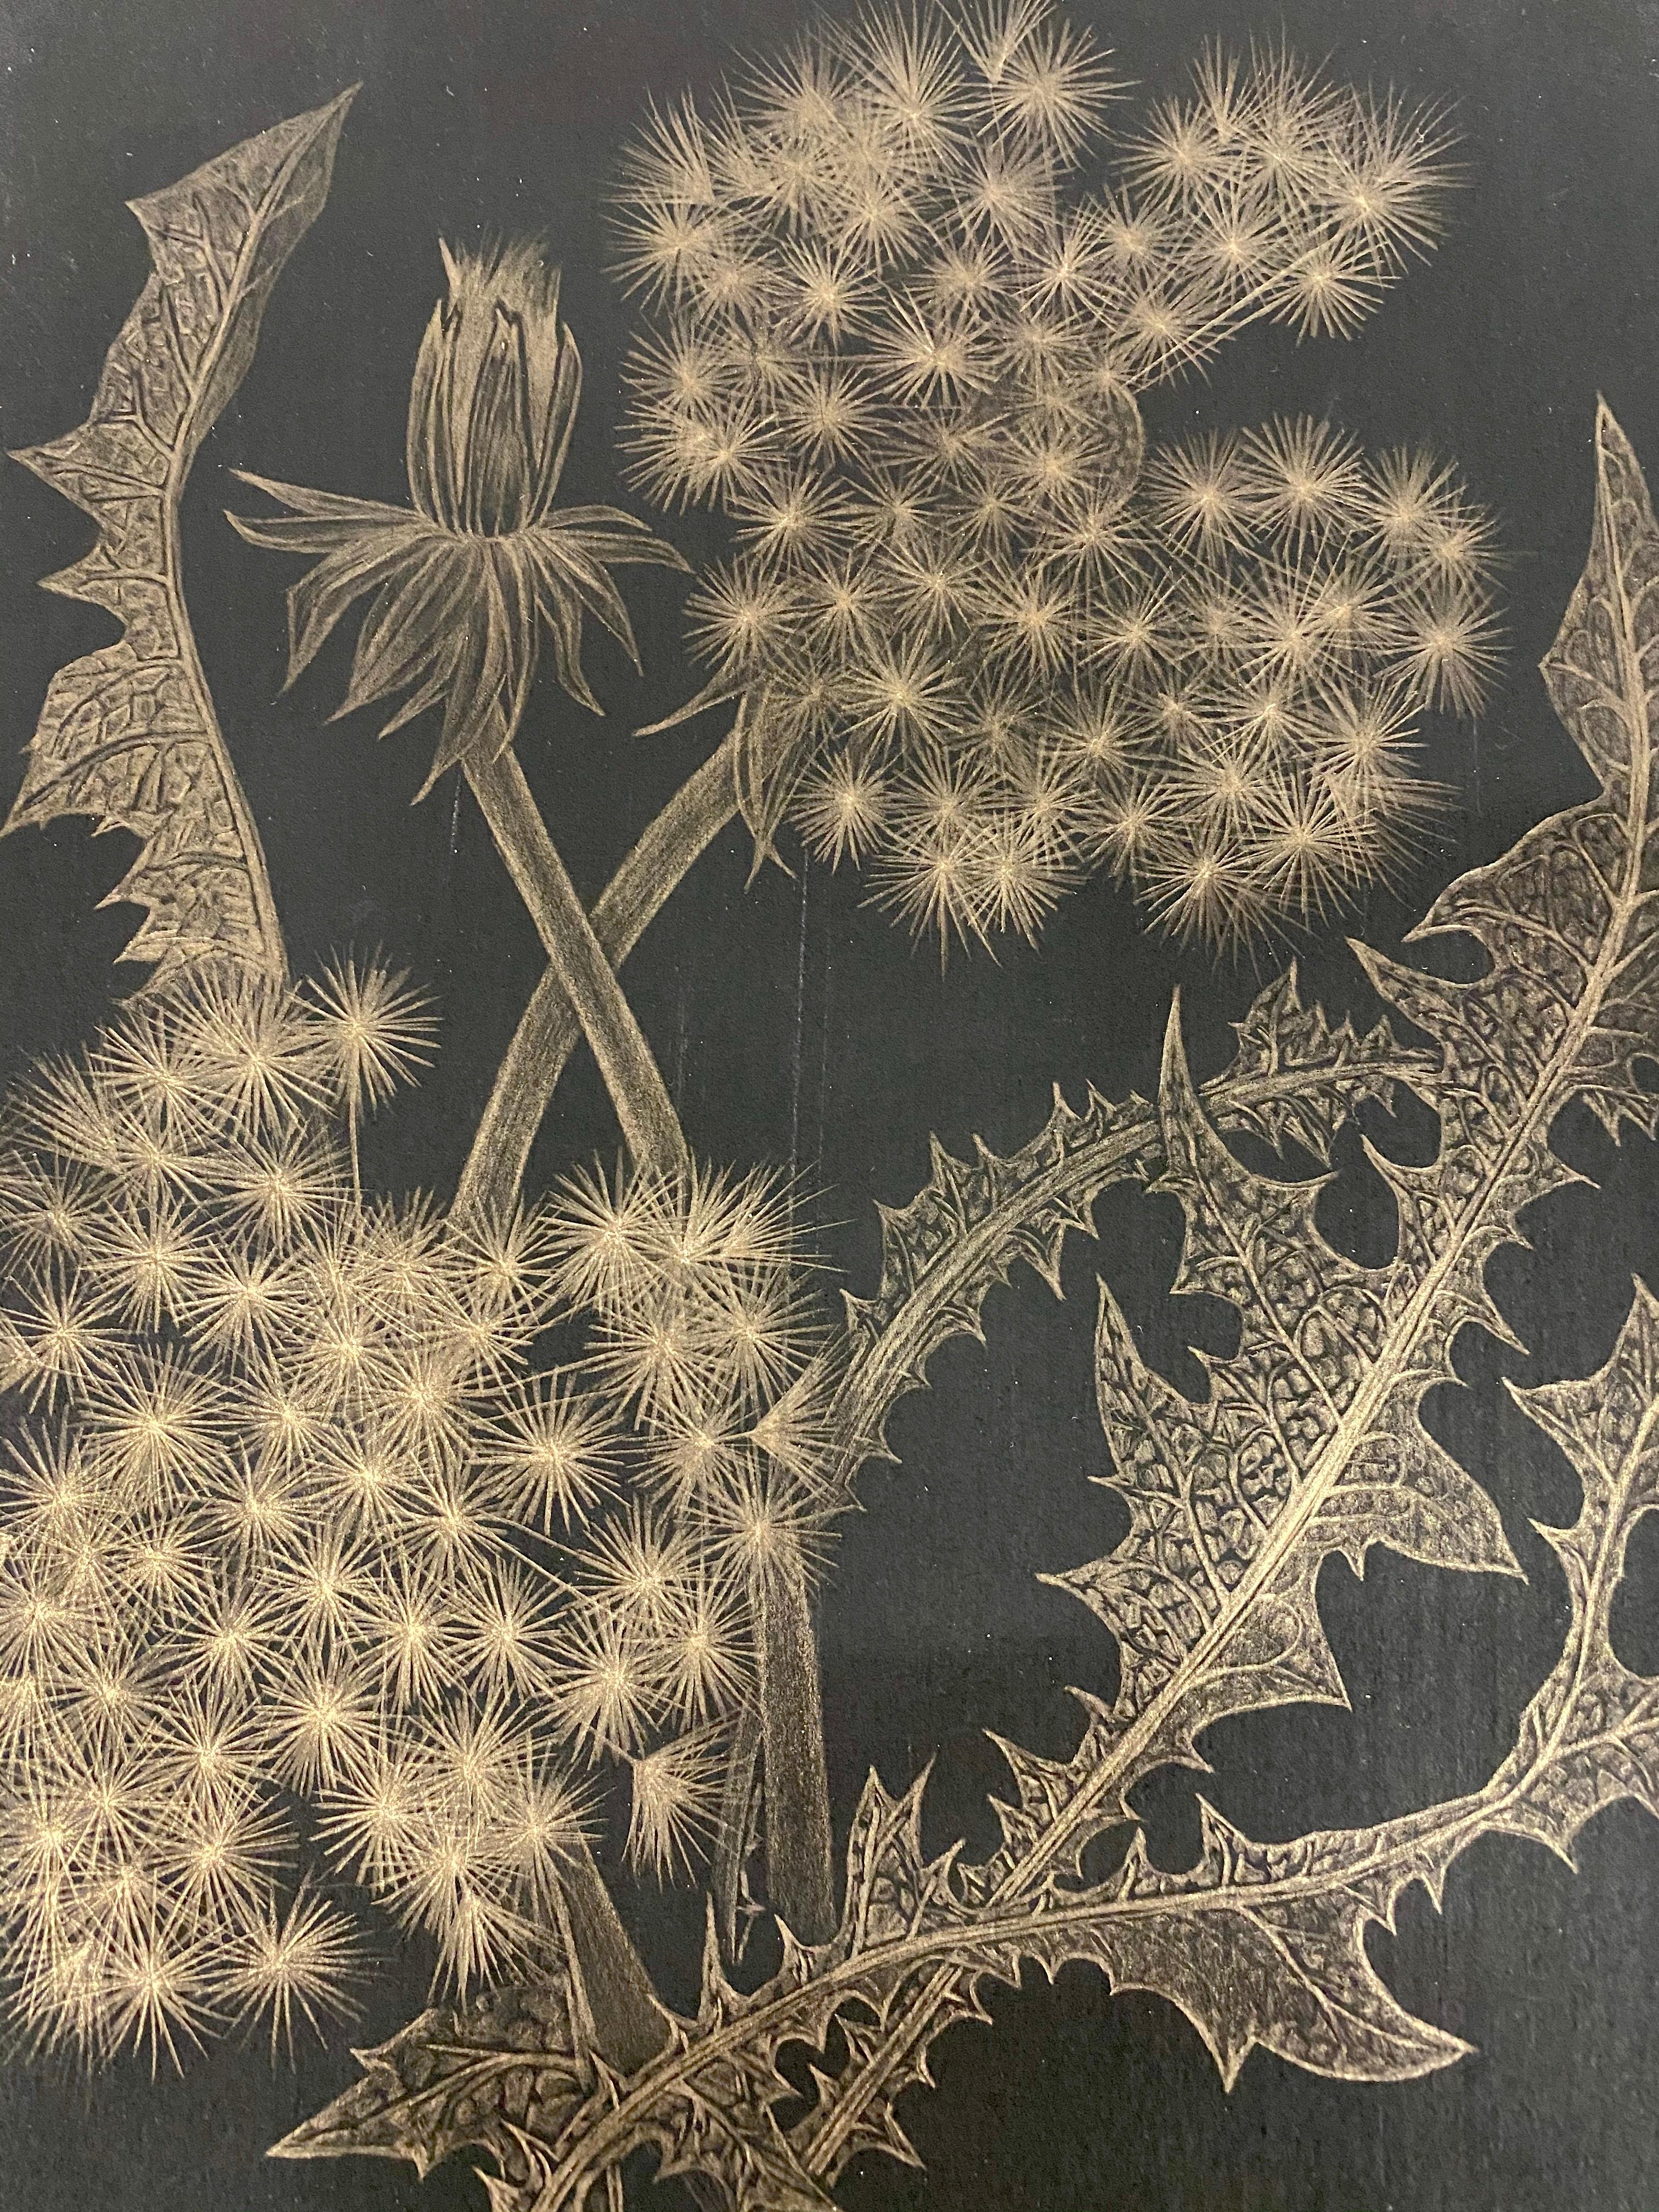 Dandelions with Bud, Small Botanical Drawing on Black Paper made with 14K Gold 3